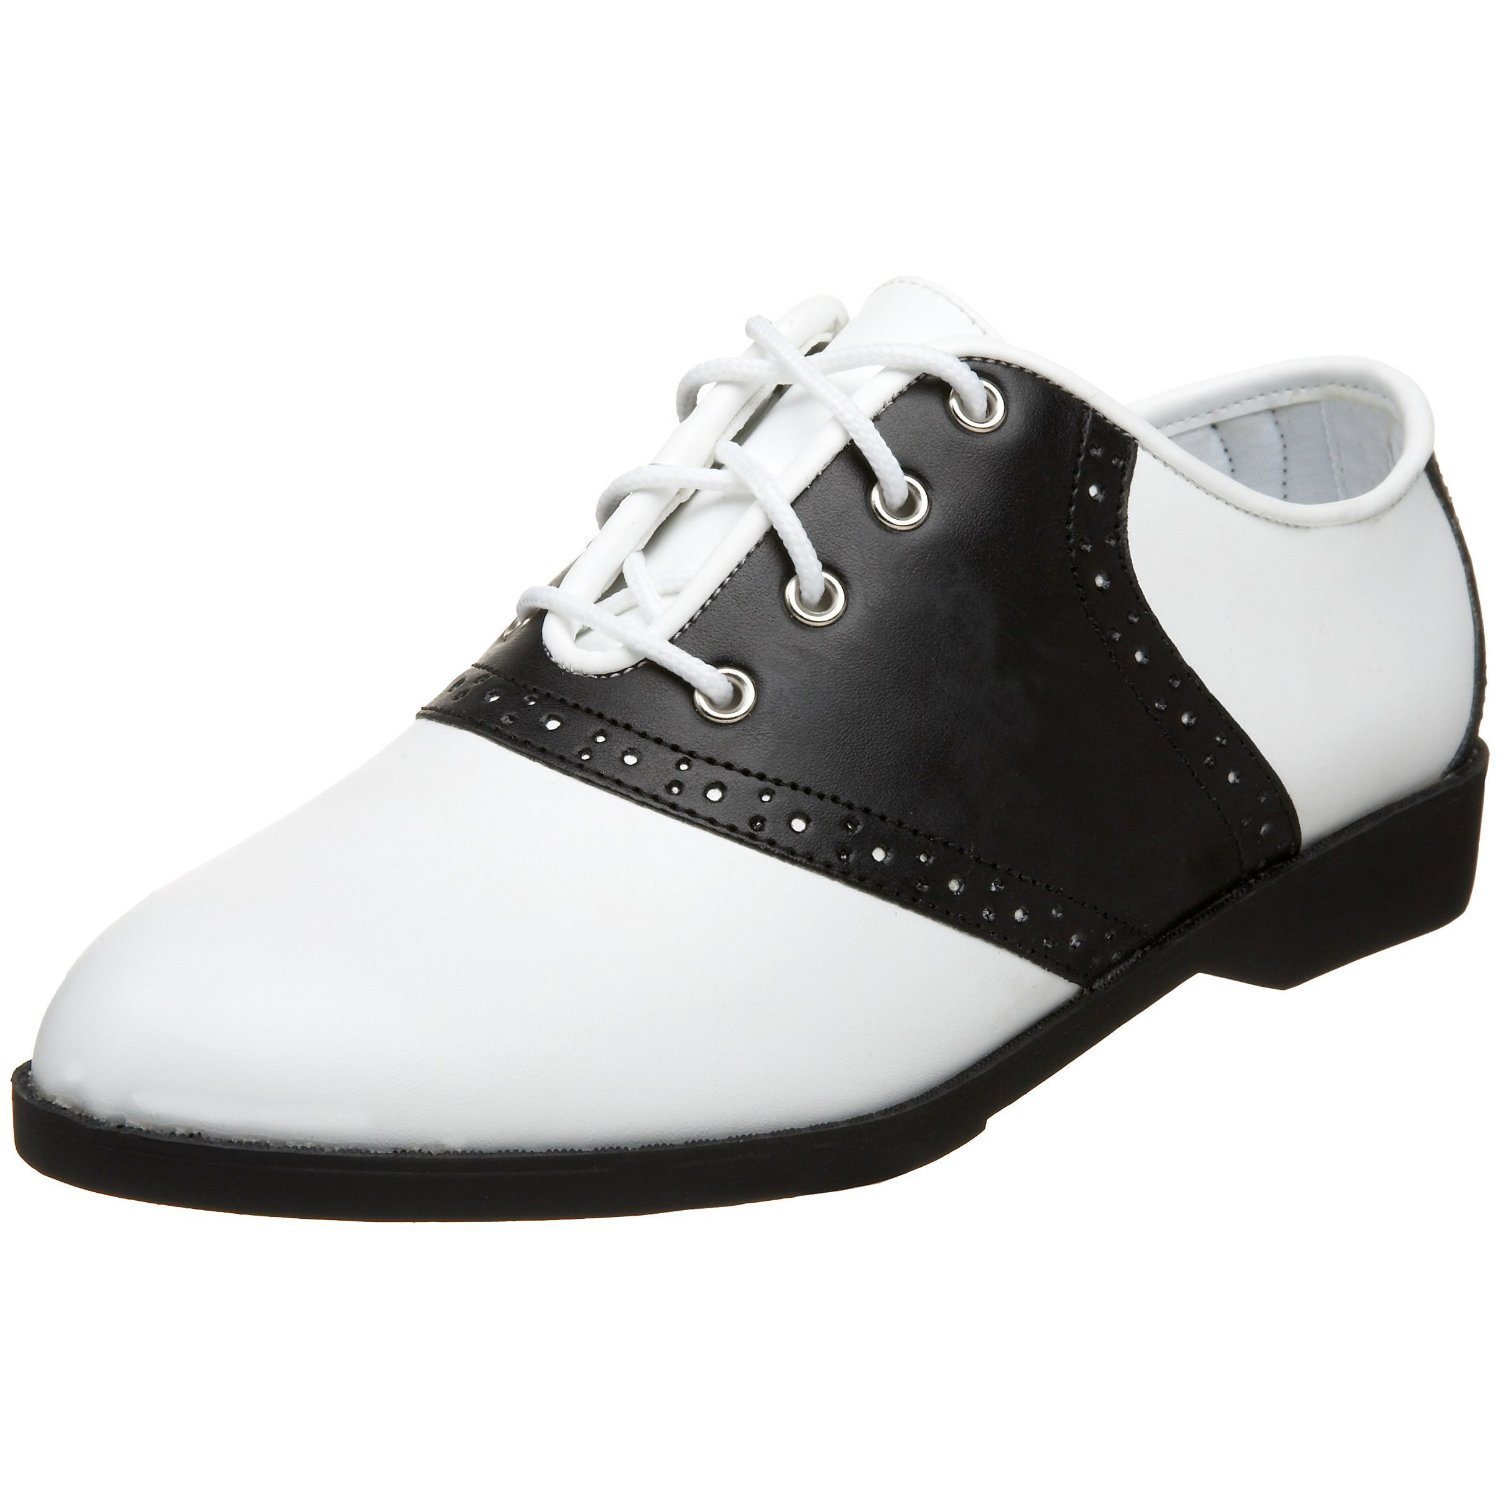 50s Vintage Black And White Saddle Shoes Oxford Grease Swing Dance 